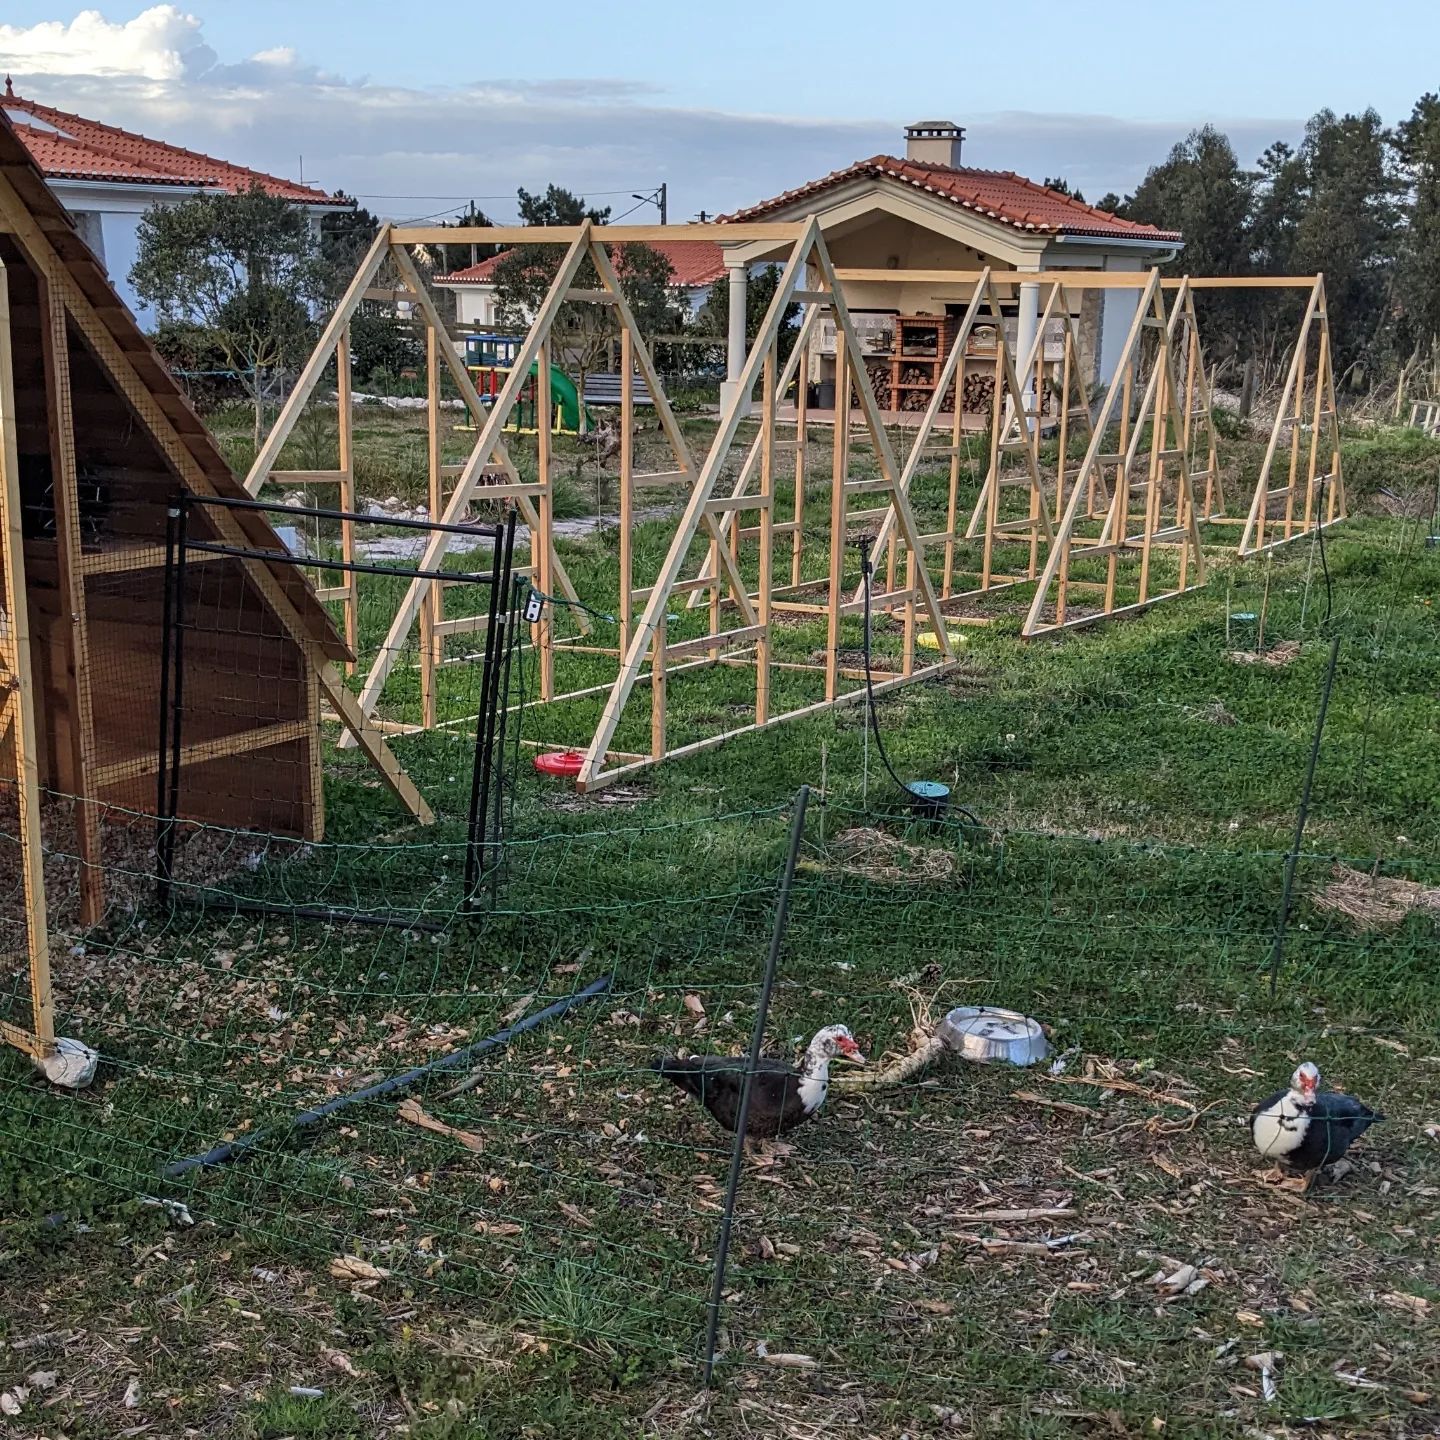 All 3 new duck coop frames in their final positions